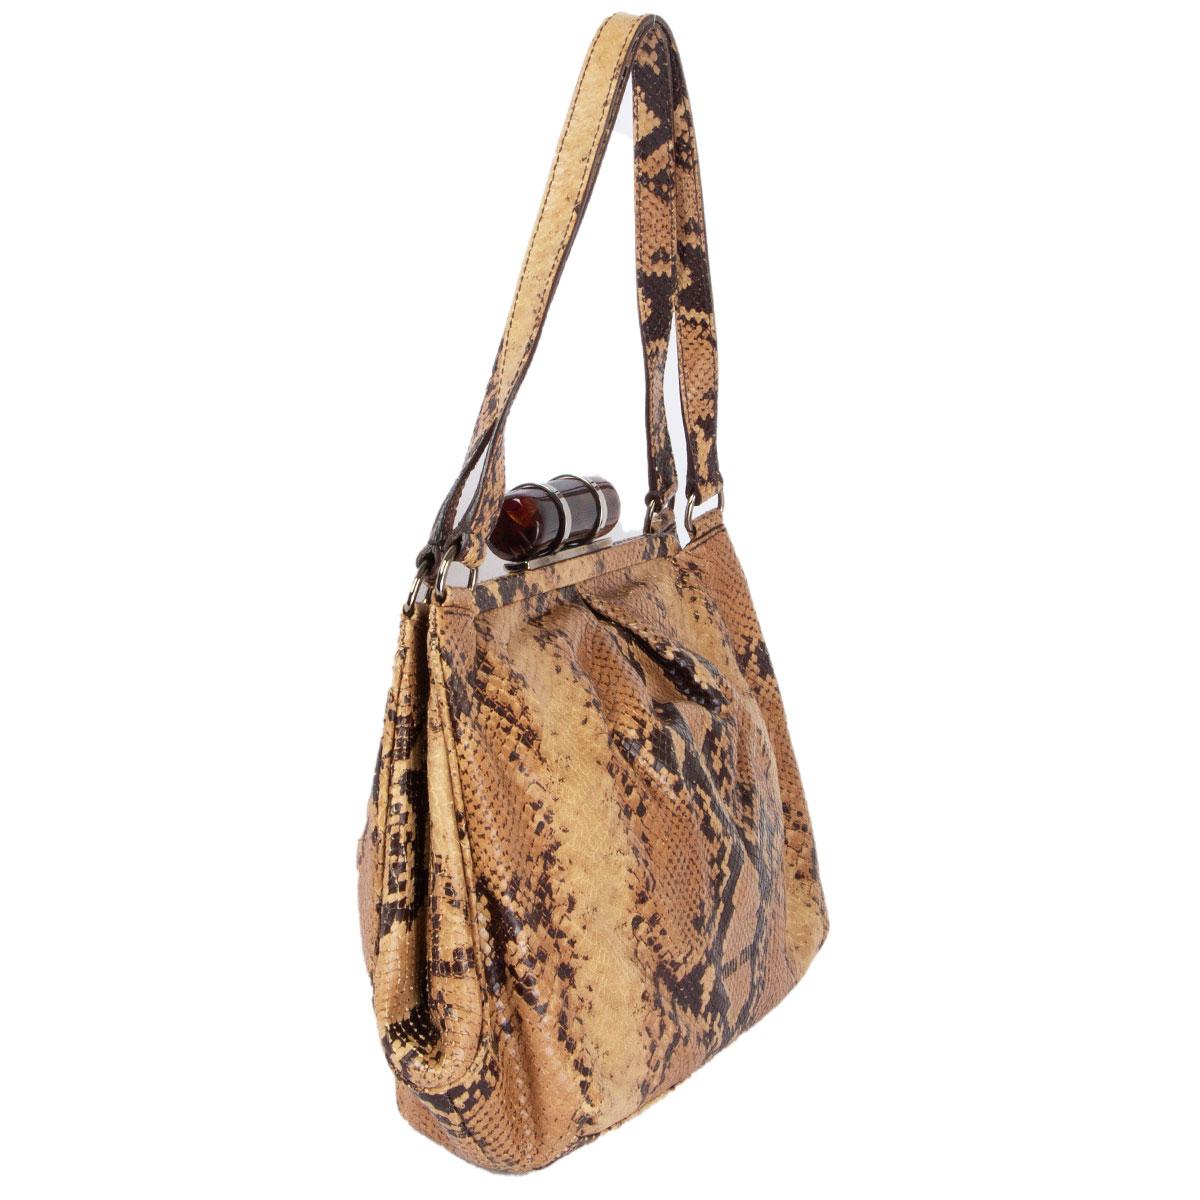 100% authentic Miu Miu shoulder bag in beige and espresso brown python embossed calfskin. Opens with dark brown acetate clasp on top and is lined in dark brown canvas with one zipper pocket against the back. Has been worn and is in excellent